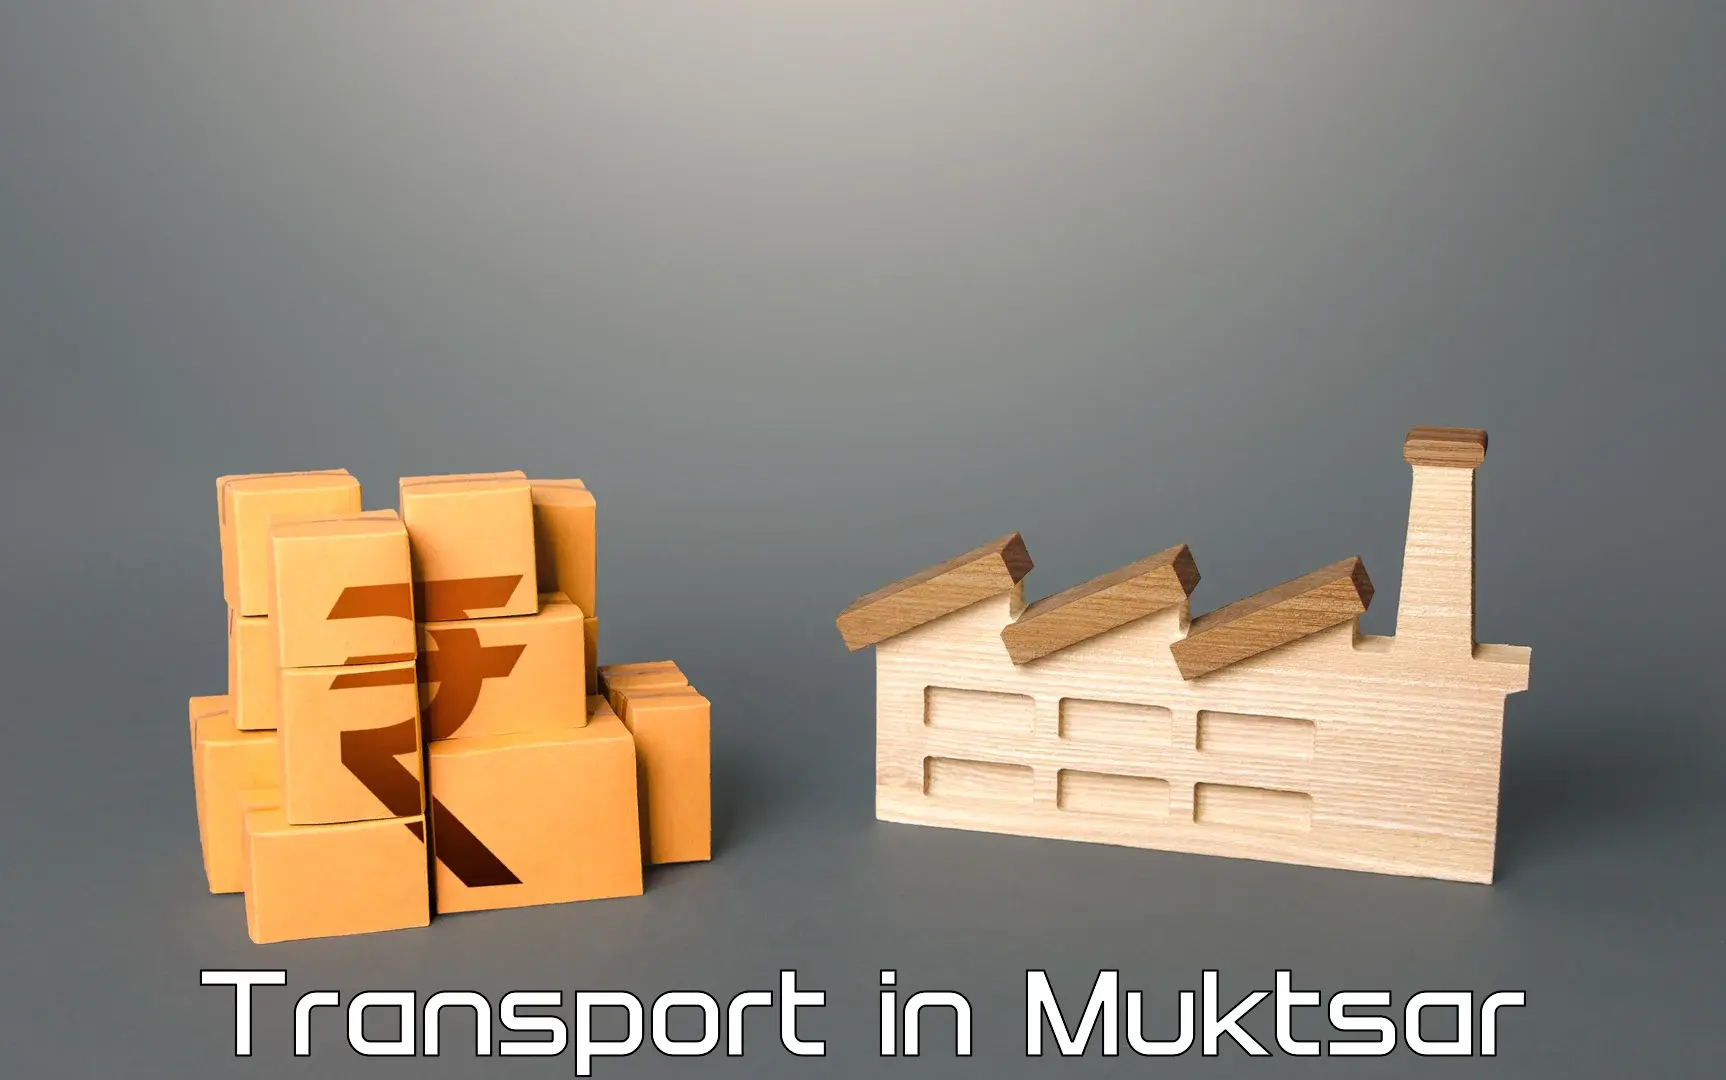 Transport bike from one state to another in Muktsar